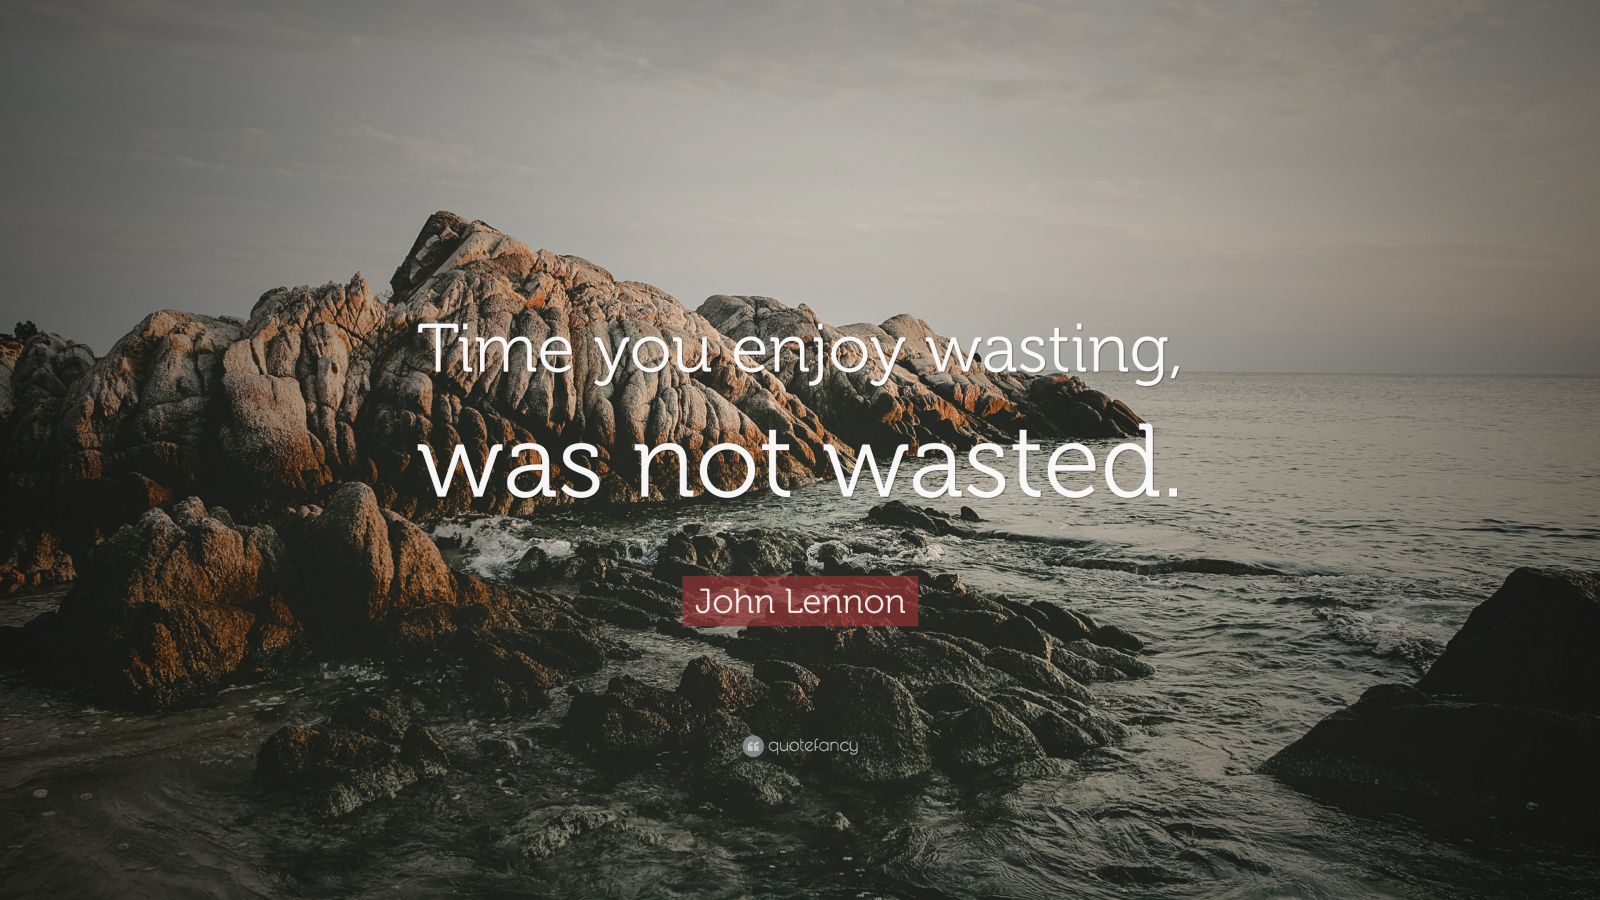 john lennon wasting time quote